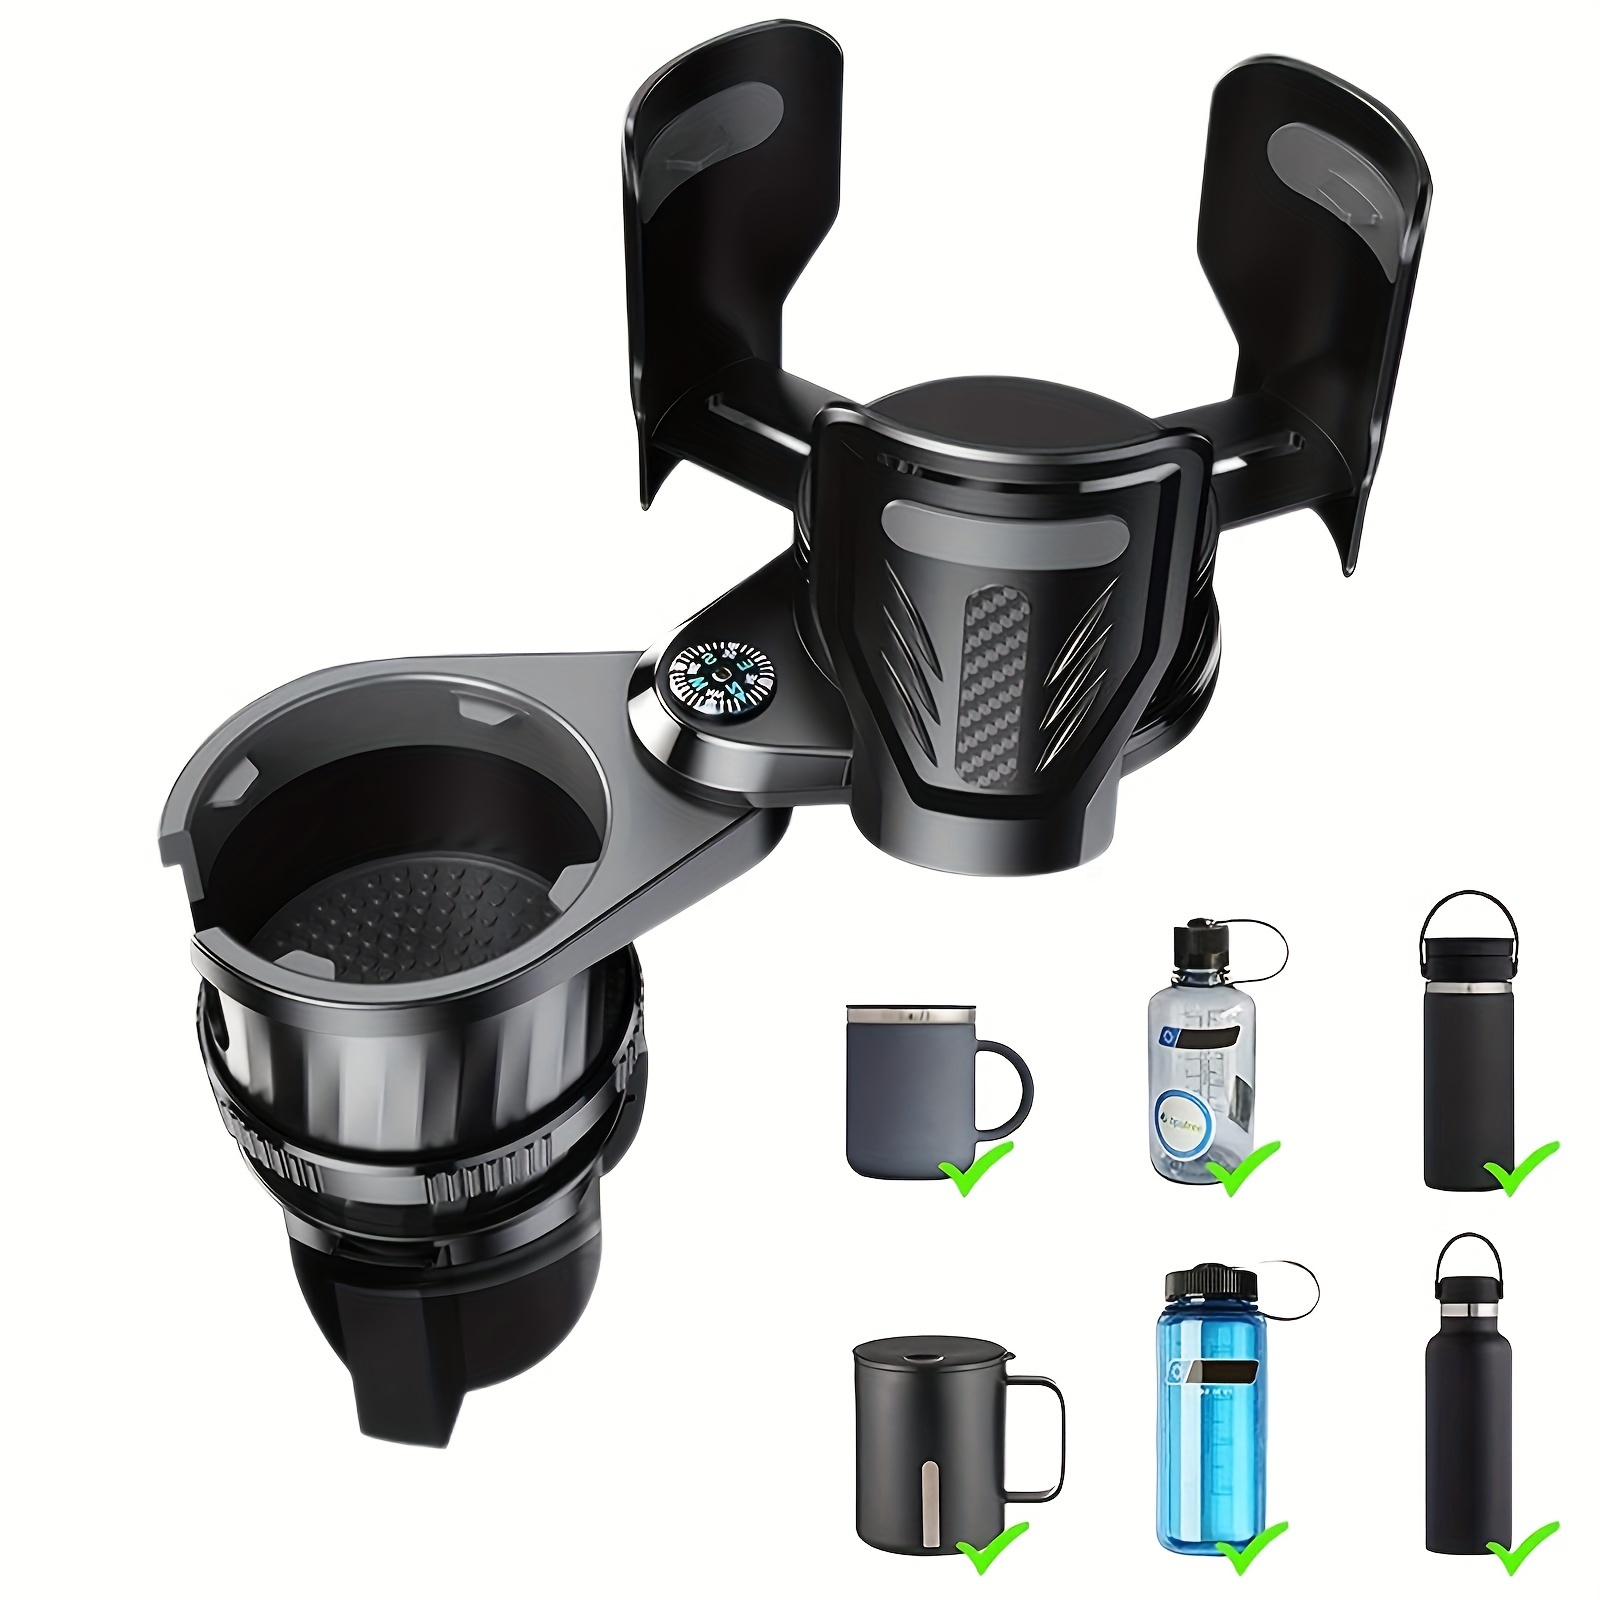 

1pc Upgraded 2 In 1 Multifunctional Car Cup Holder Expander Adjustable And Stable Dual Cup Holder With Compass Vehicle Drink Cup Adapter For Most Car Truck